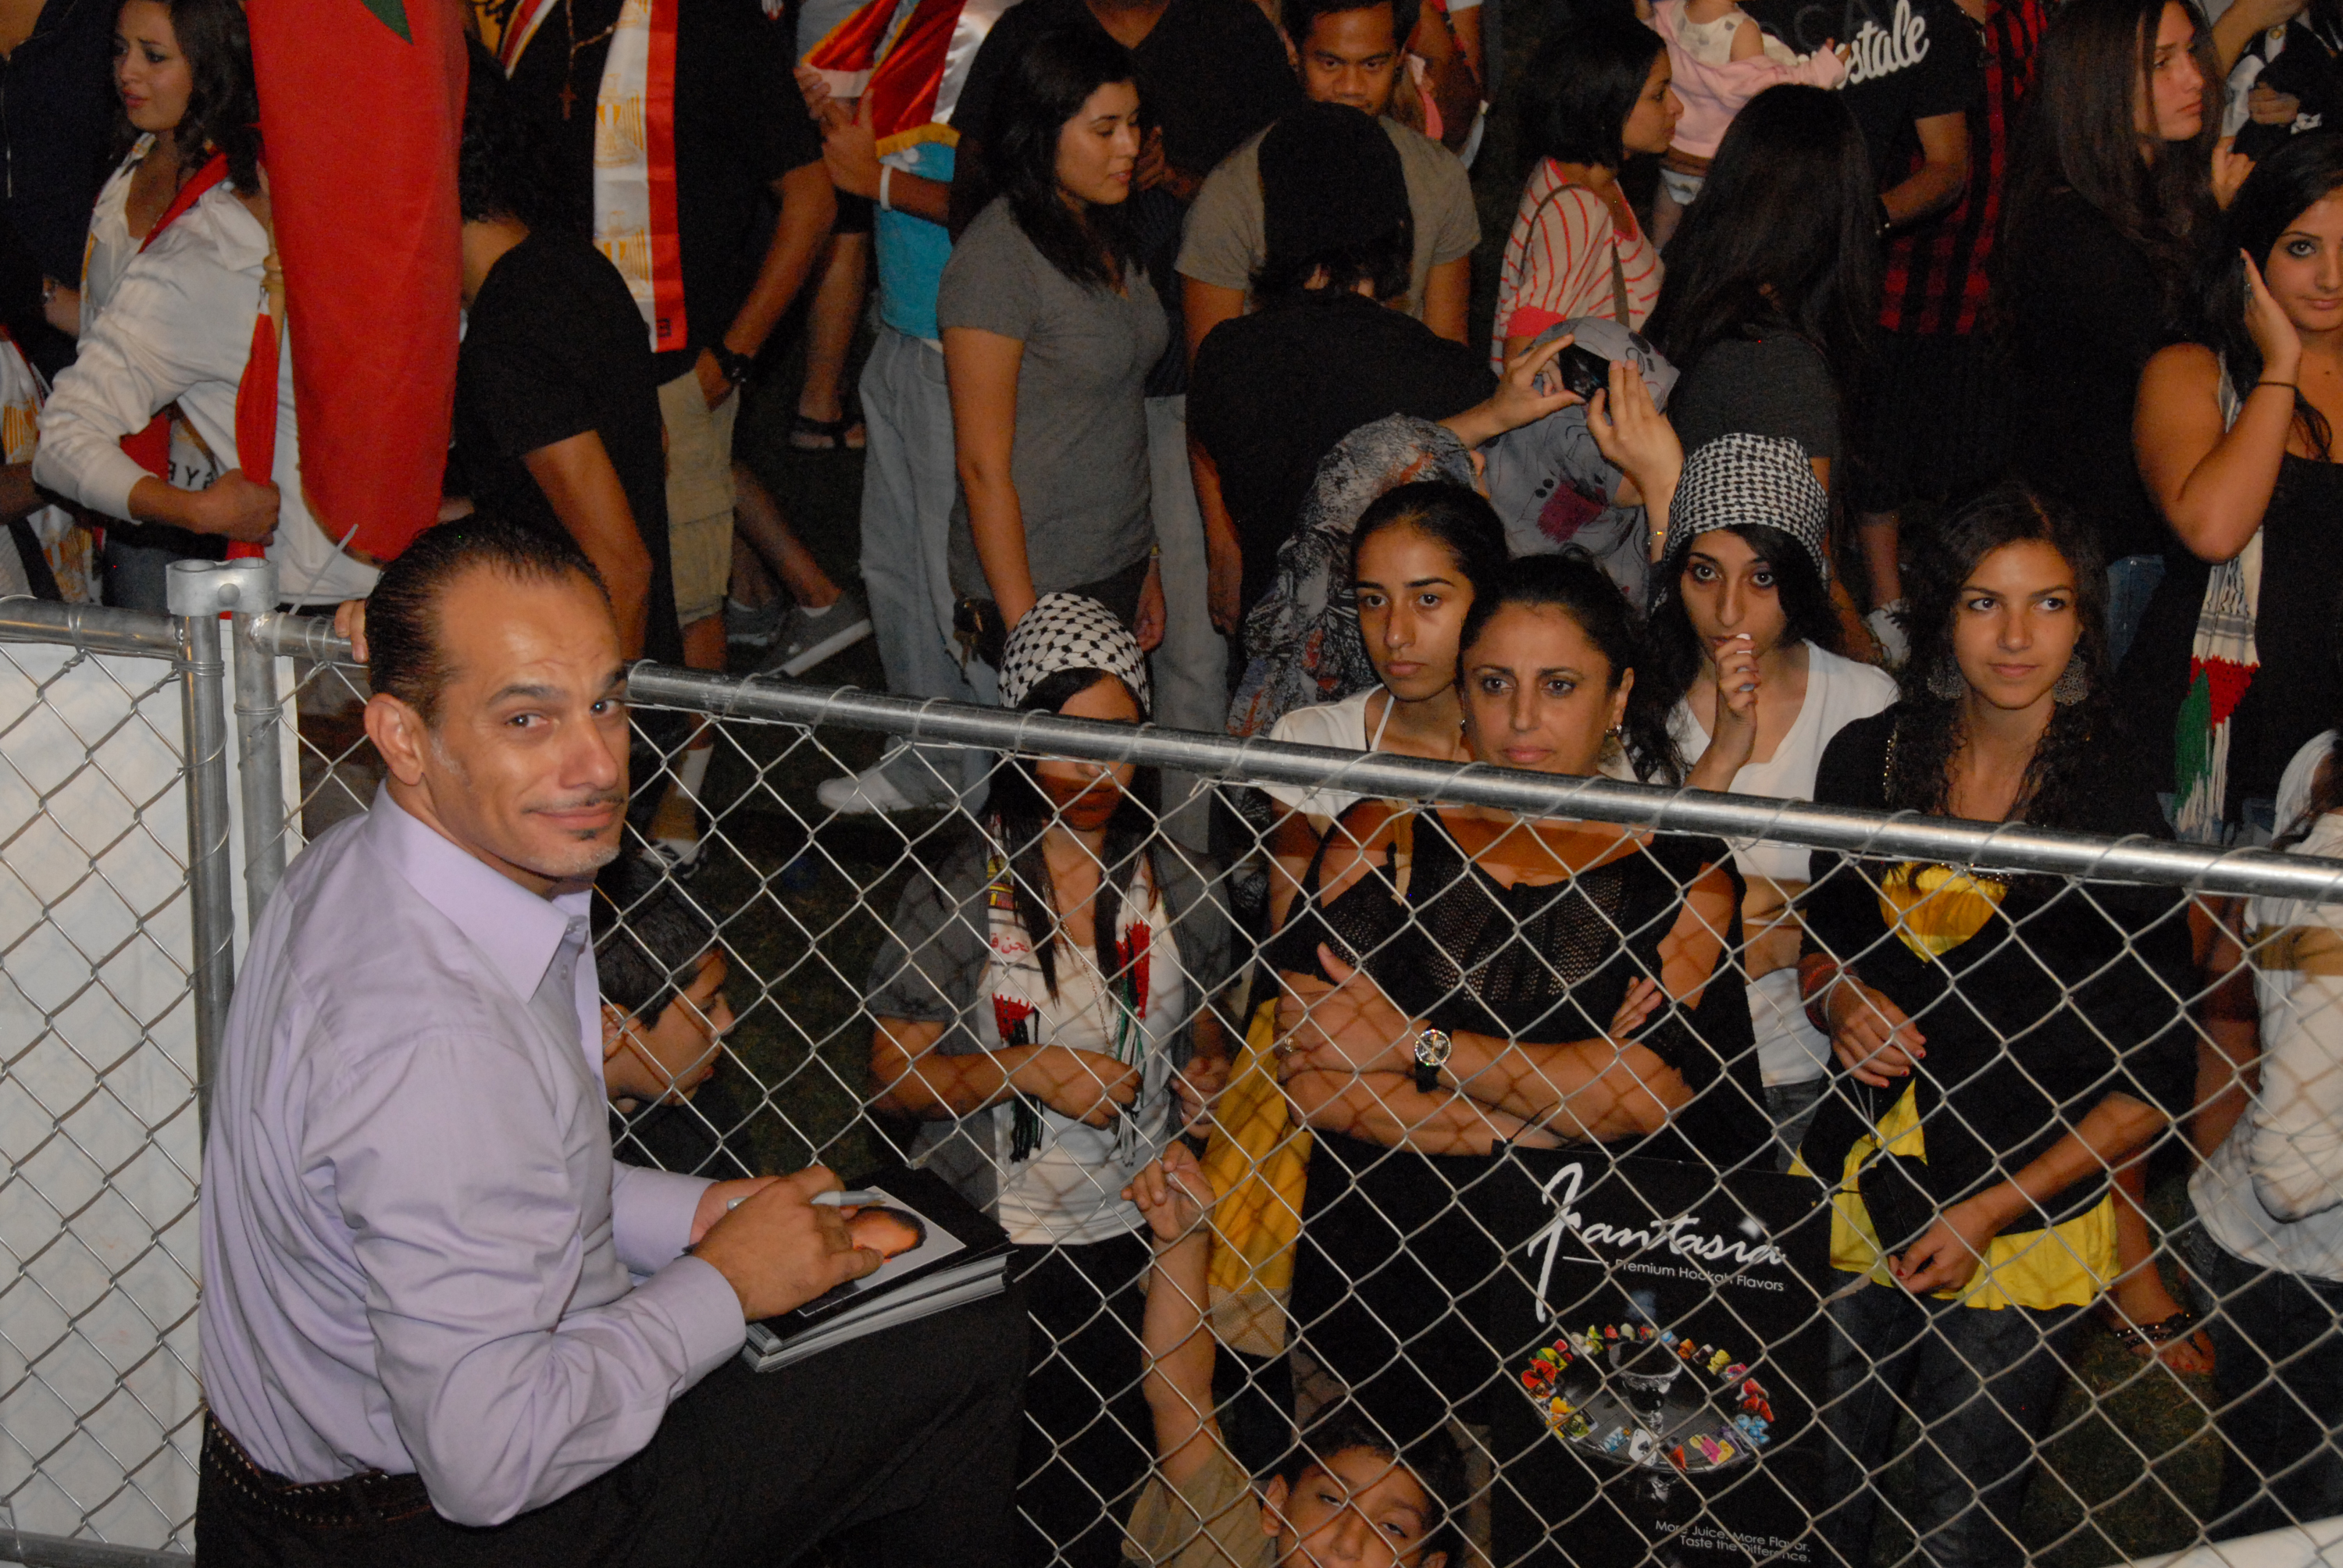 Signing Autographs At the Arab American Festival Sept 25,2010